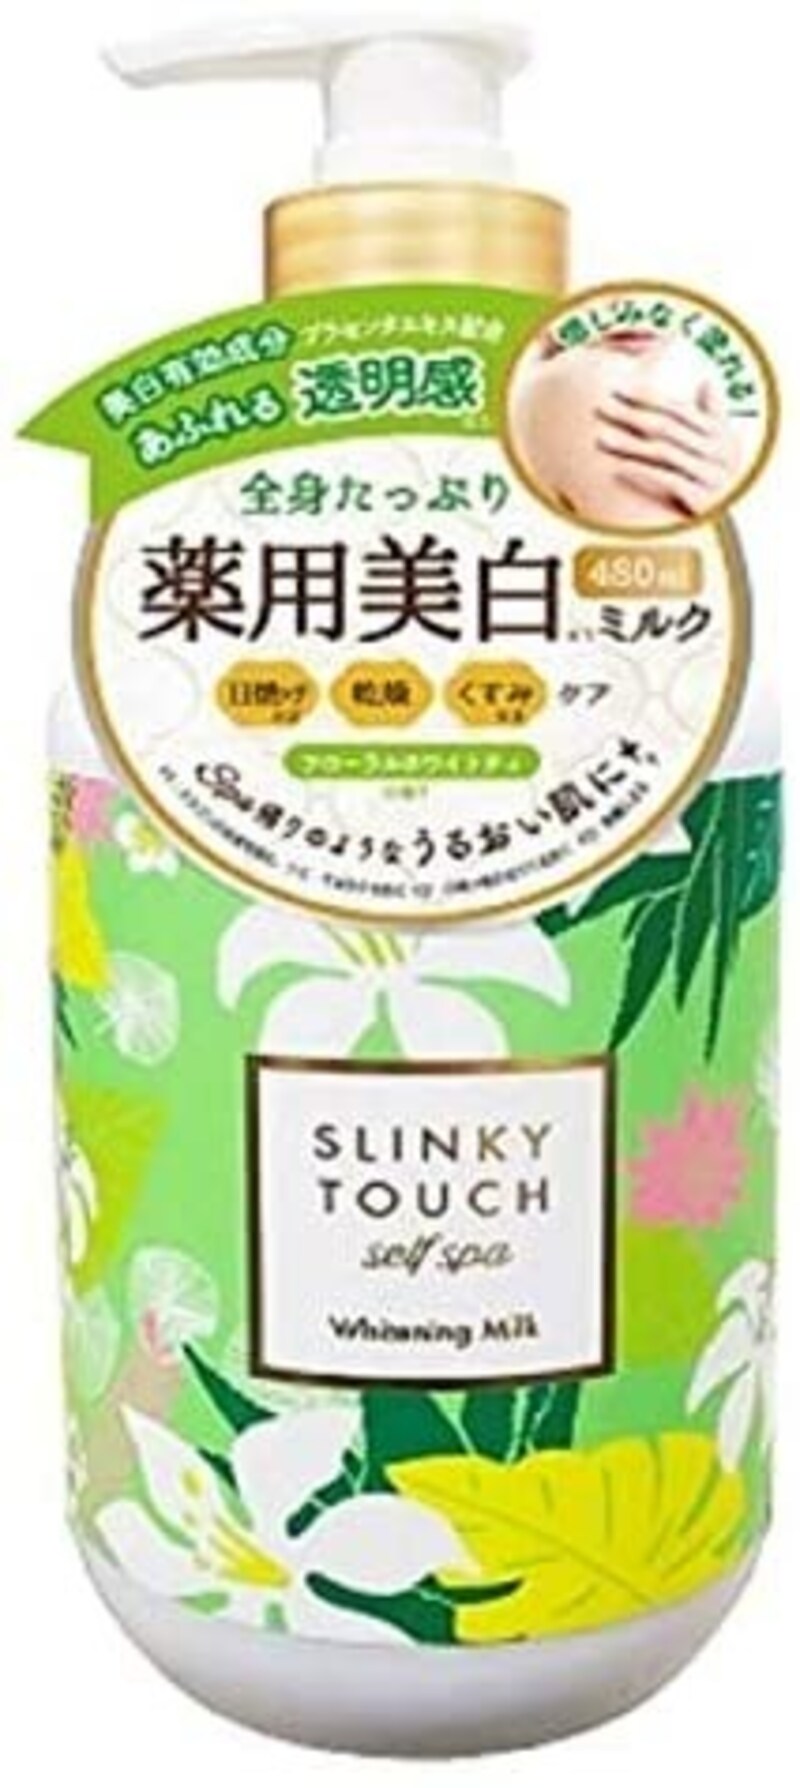 SLINKY TOUCH（スリンキータッチ）,薬用美白ミルク